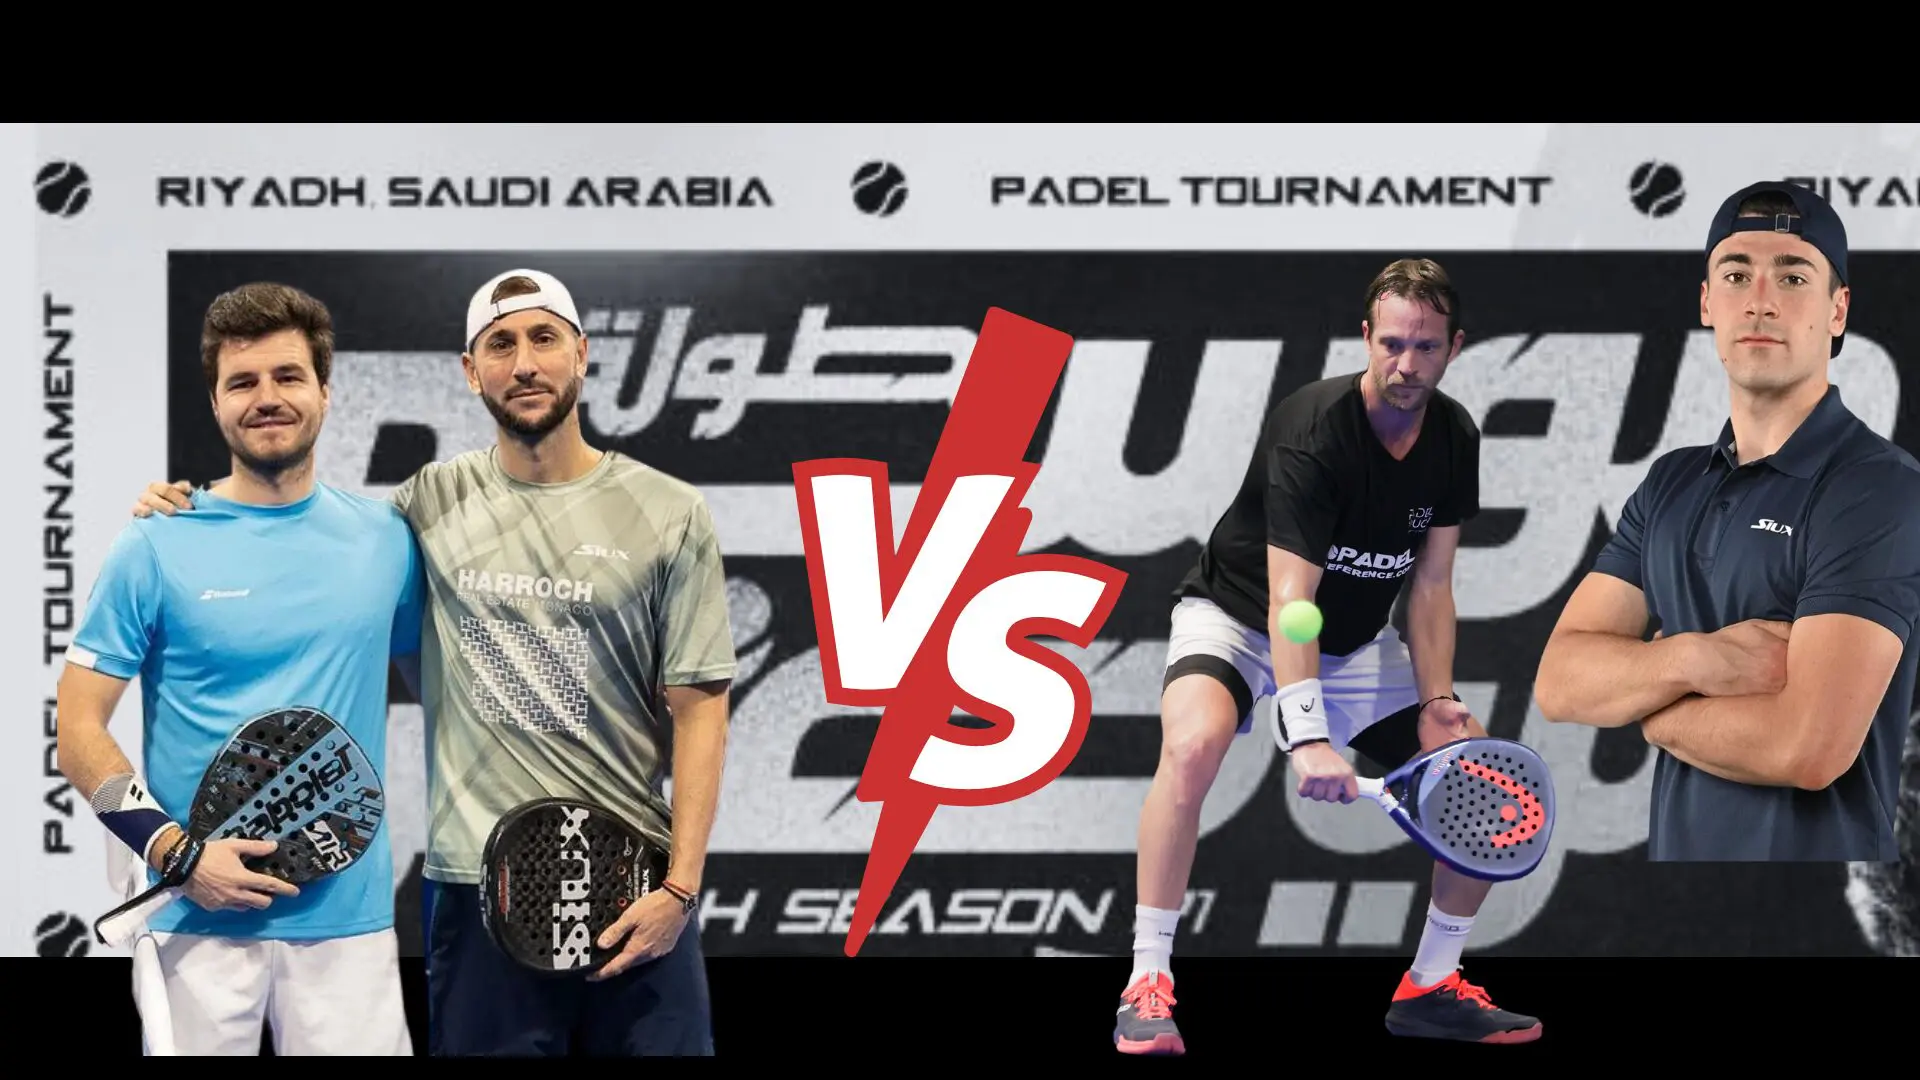 Premier Padel Riyadh P1 – The qualifying program, with a clash between French people!